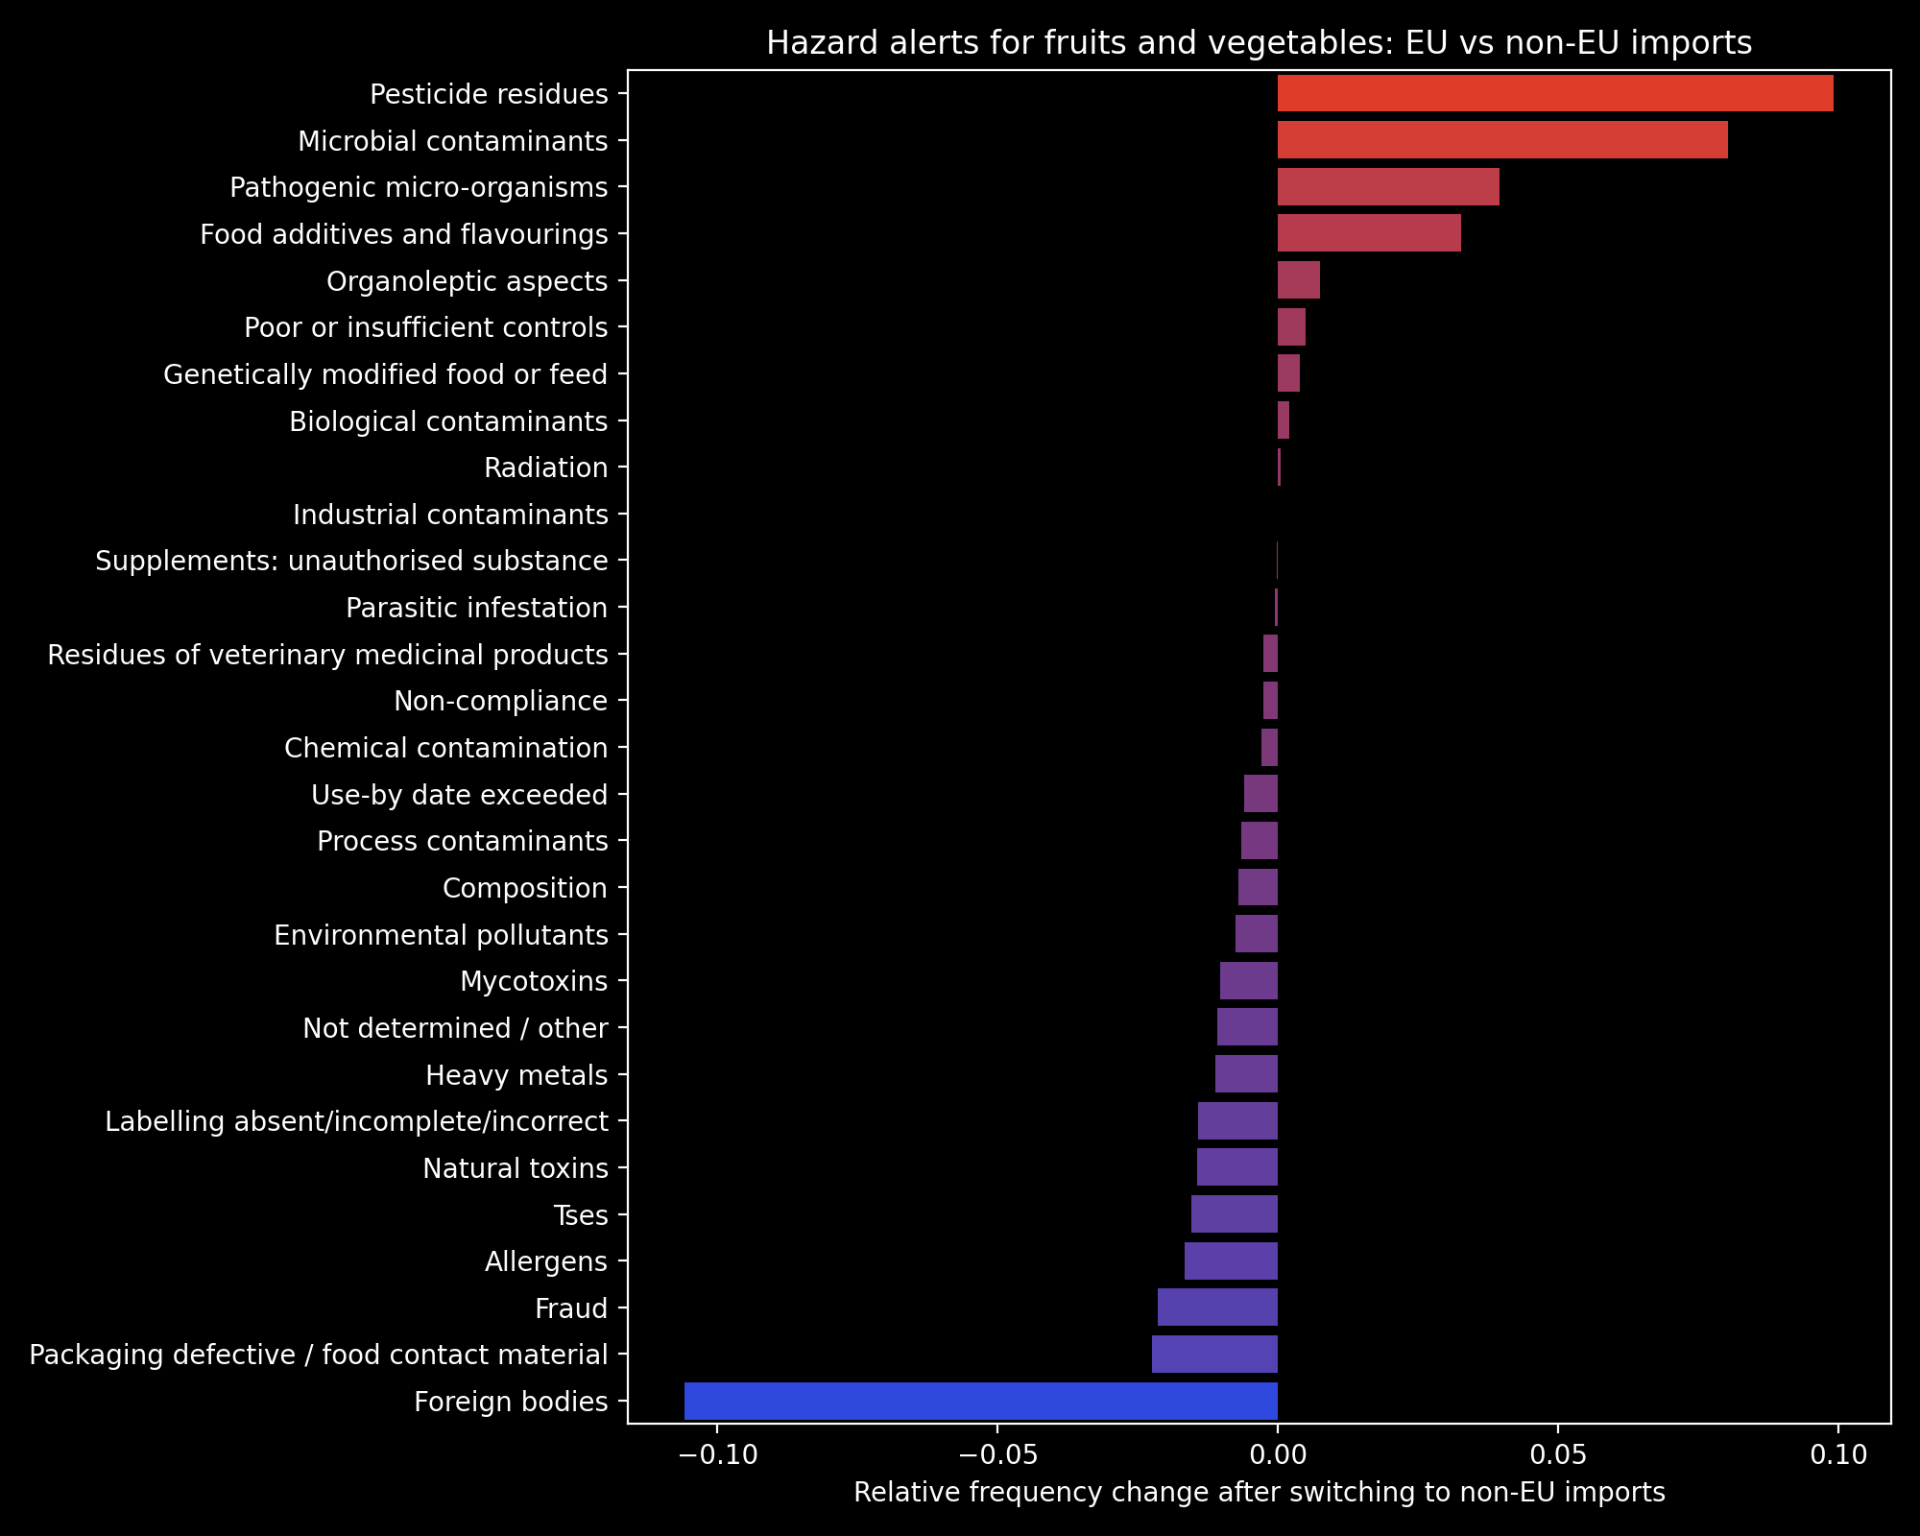 Bar chart showing difference in frequency of various food hazards, such as foreign bodies and allergens, after switching to non EU imports